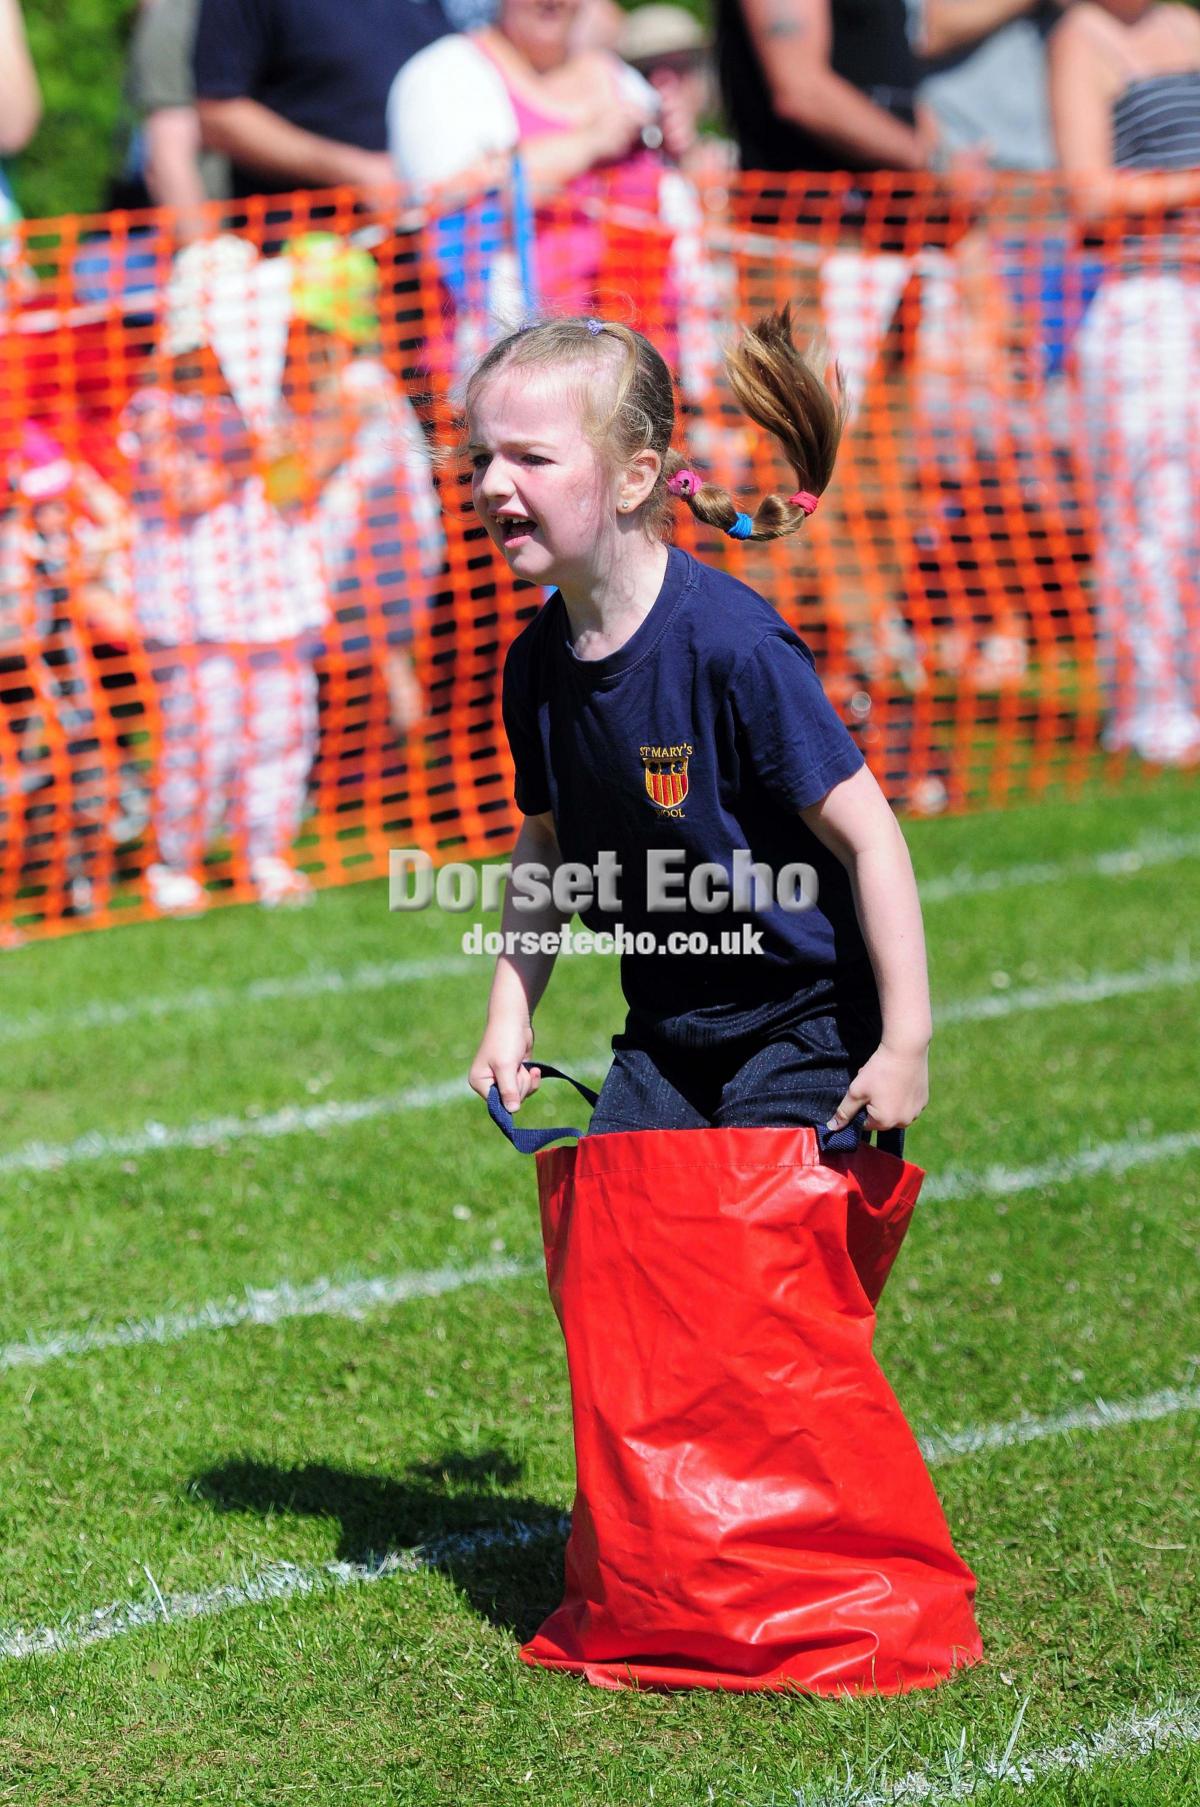 St Mary's Catholic First School sports day